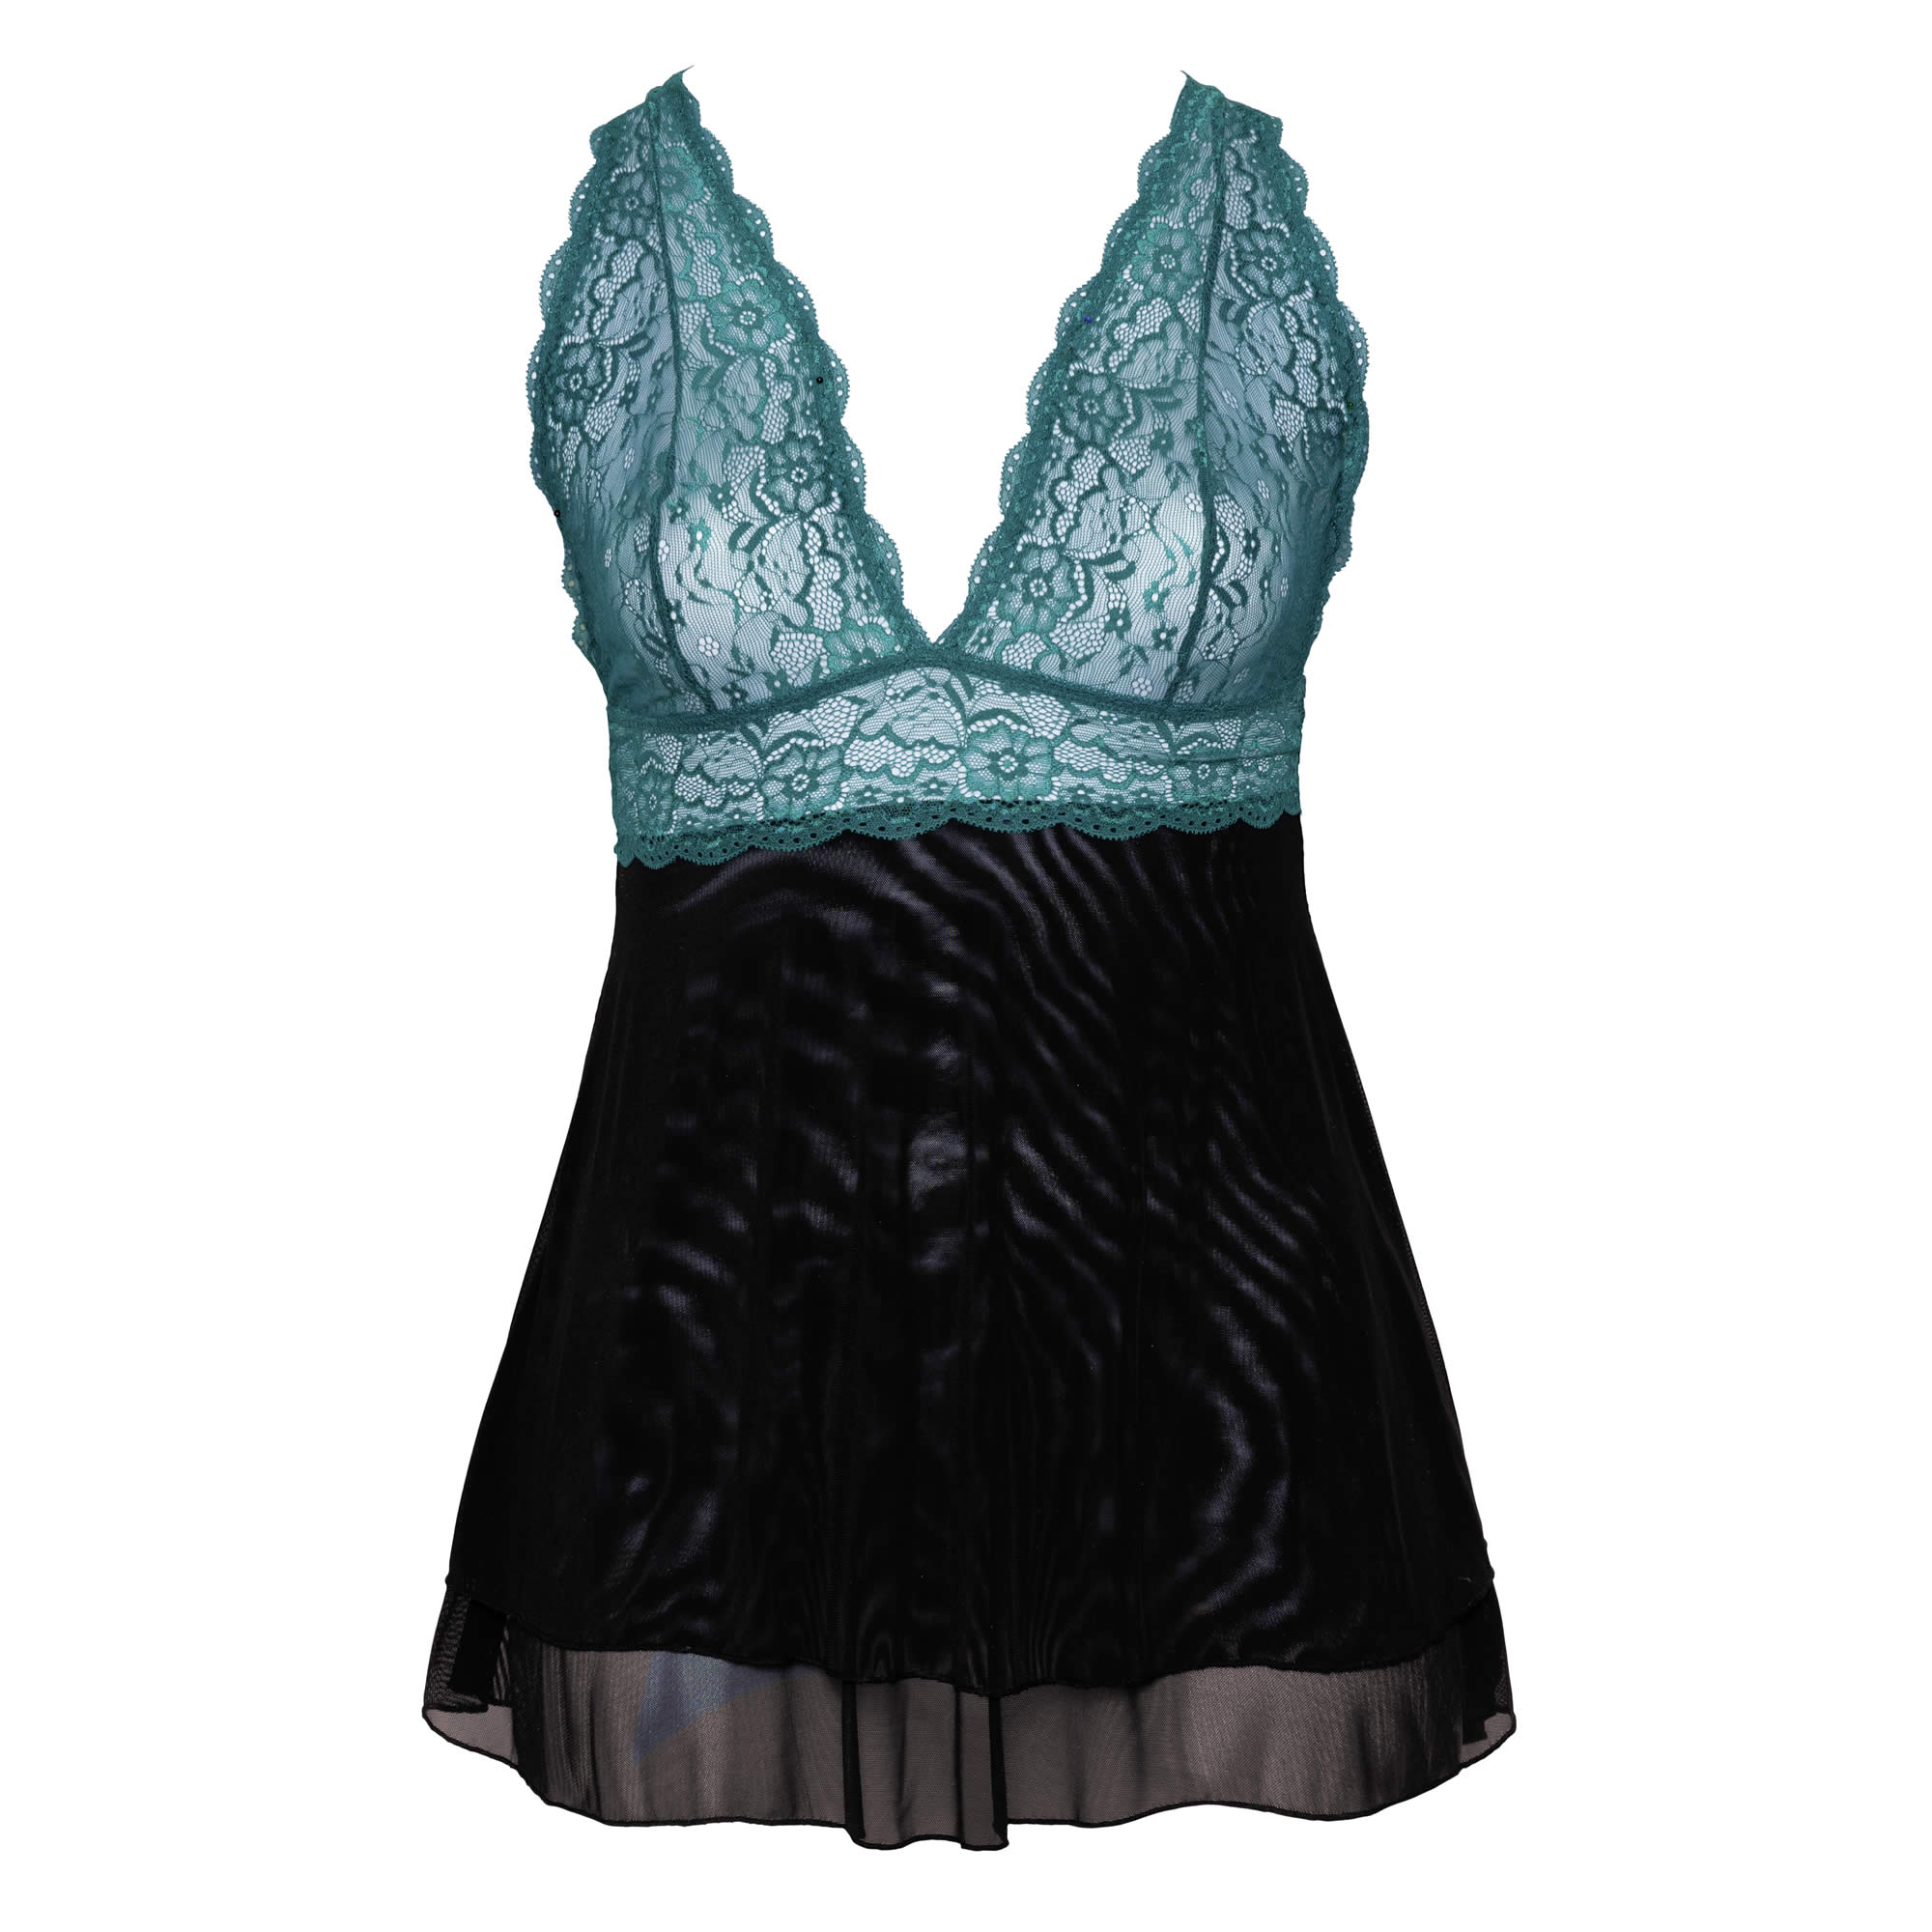 Plus Size Babydoll in Teal Lace